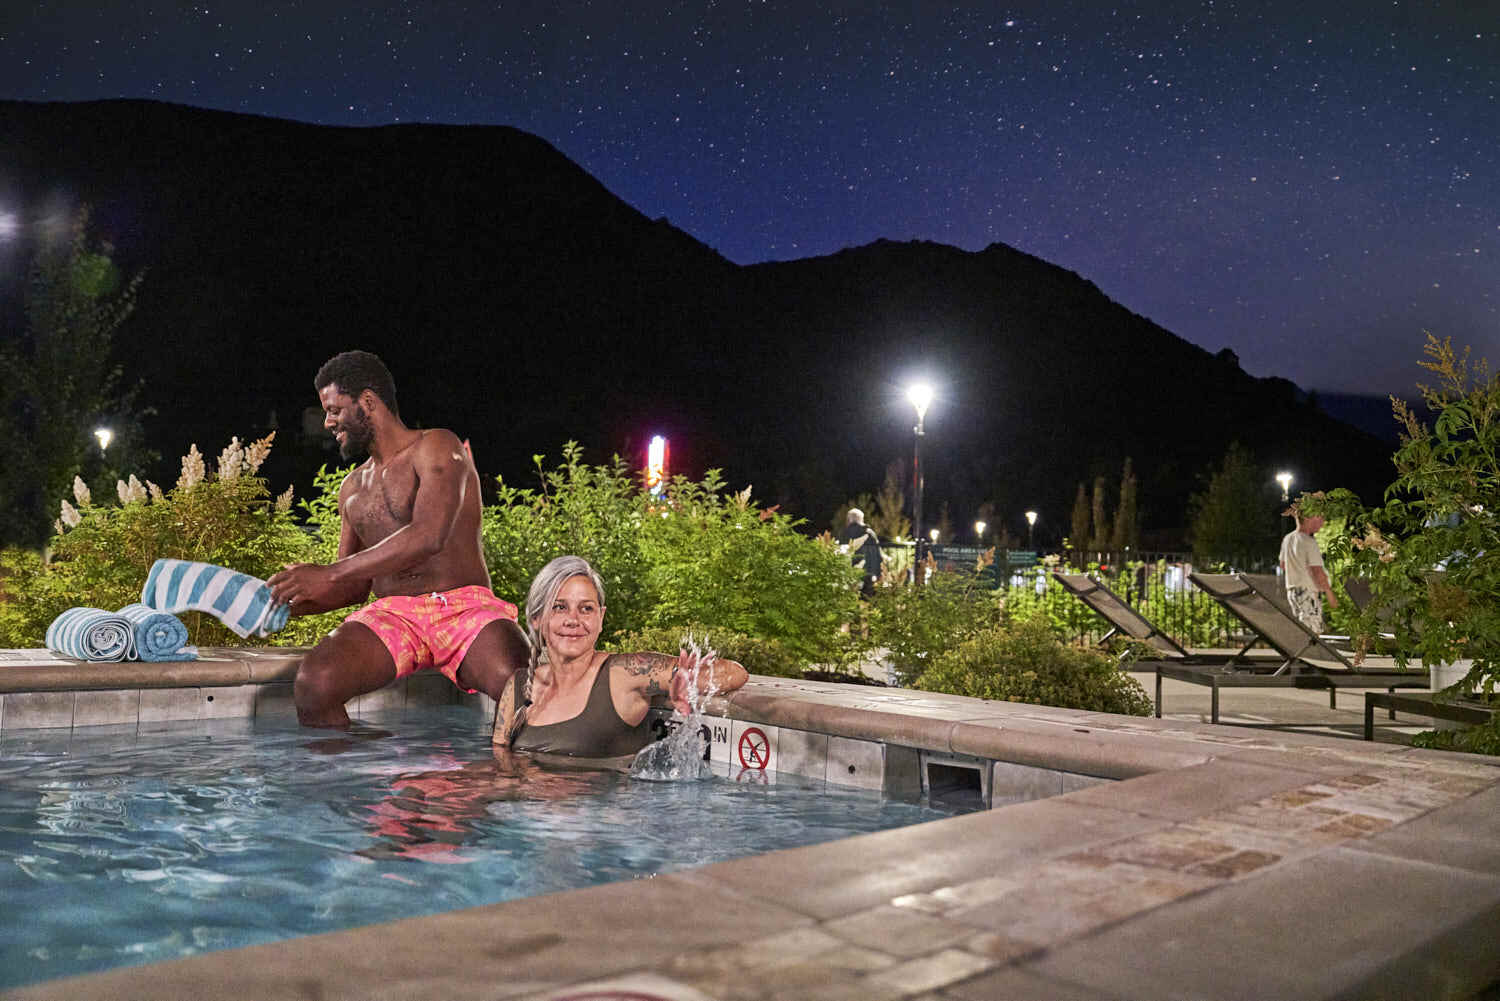 Man and woman delight in a pool bath with a scenic mountain view under a sparkling sky.